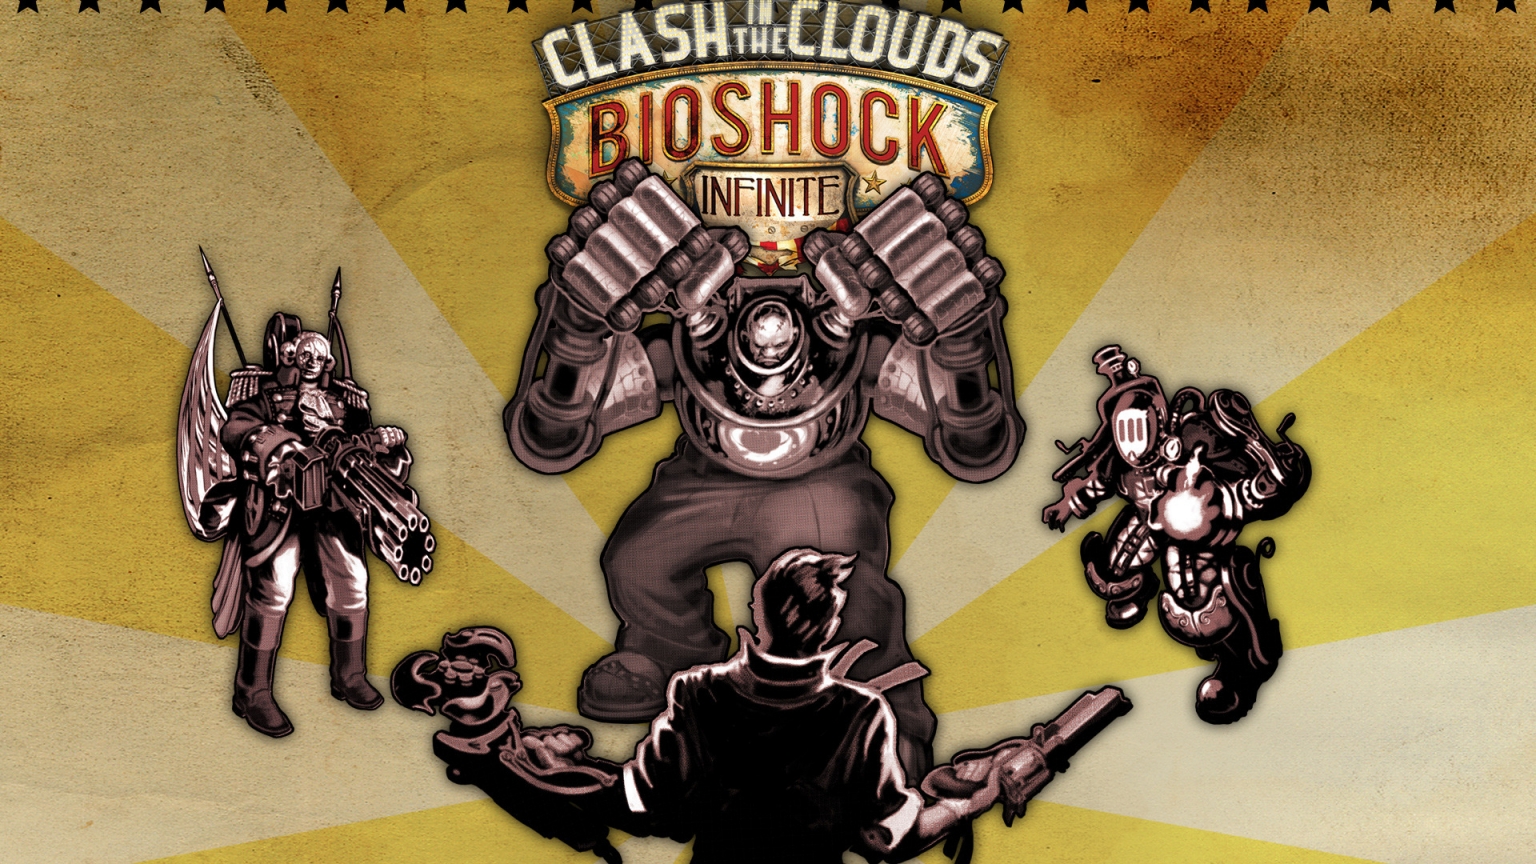 BioShock Infinite Clash in the Clouds for 1536 x 864 HDTV resolution